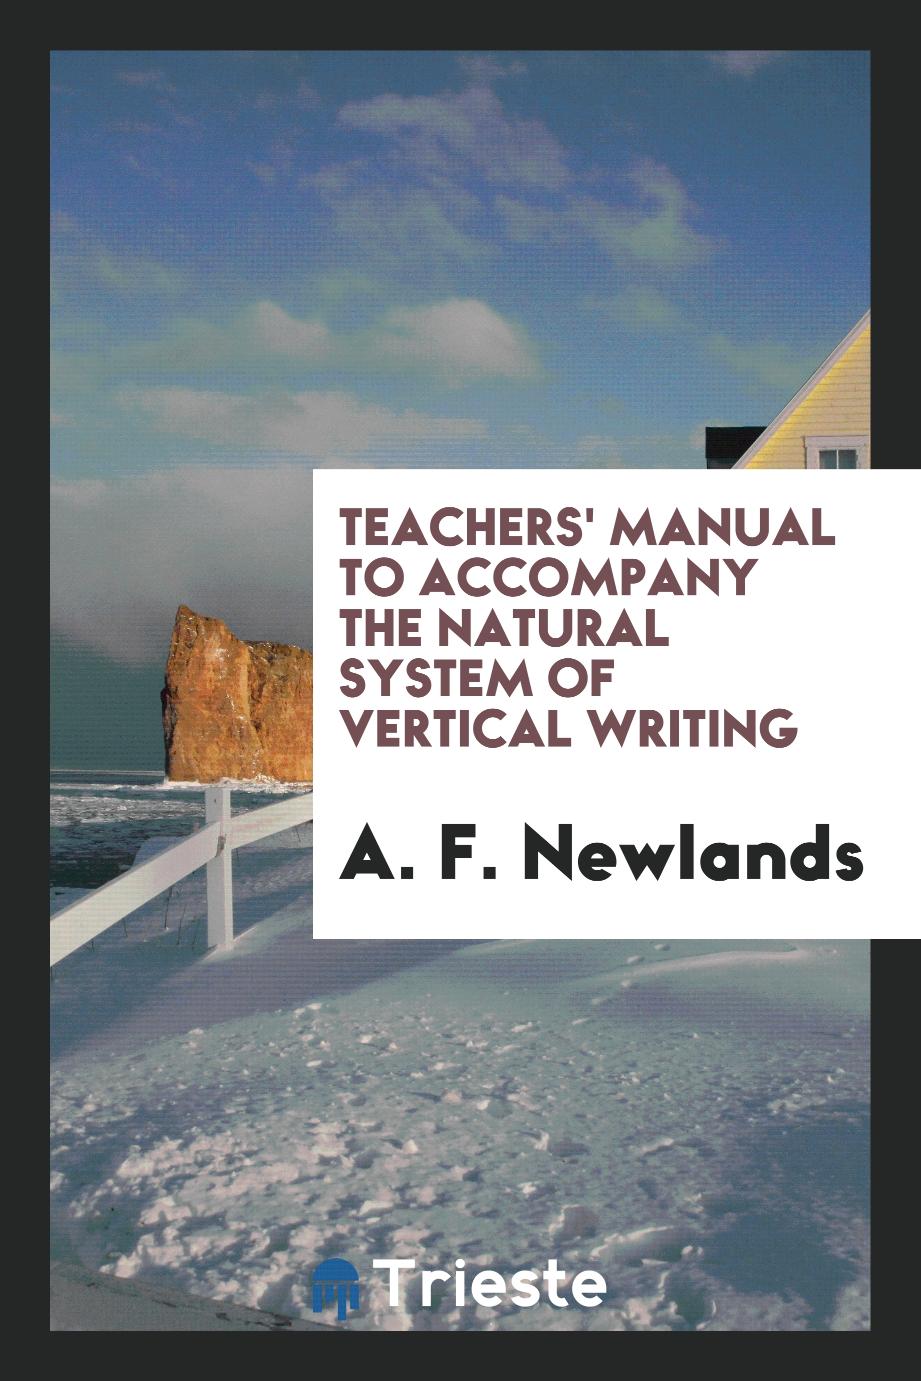 Teachers' Manual to Accompany the Natural System of Vertical Writing